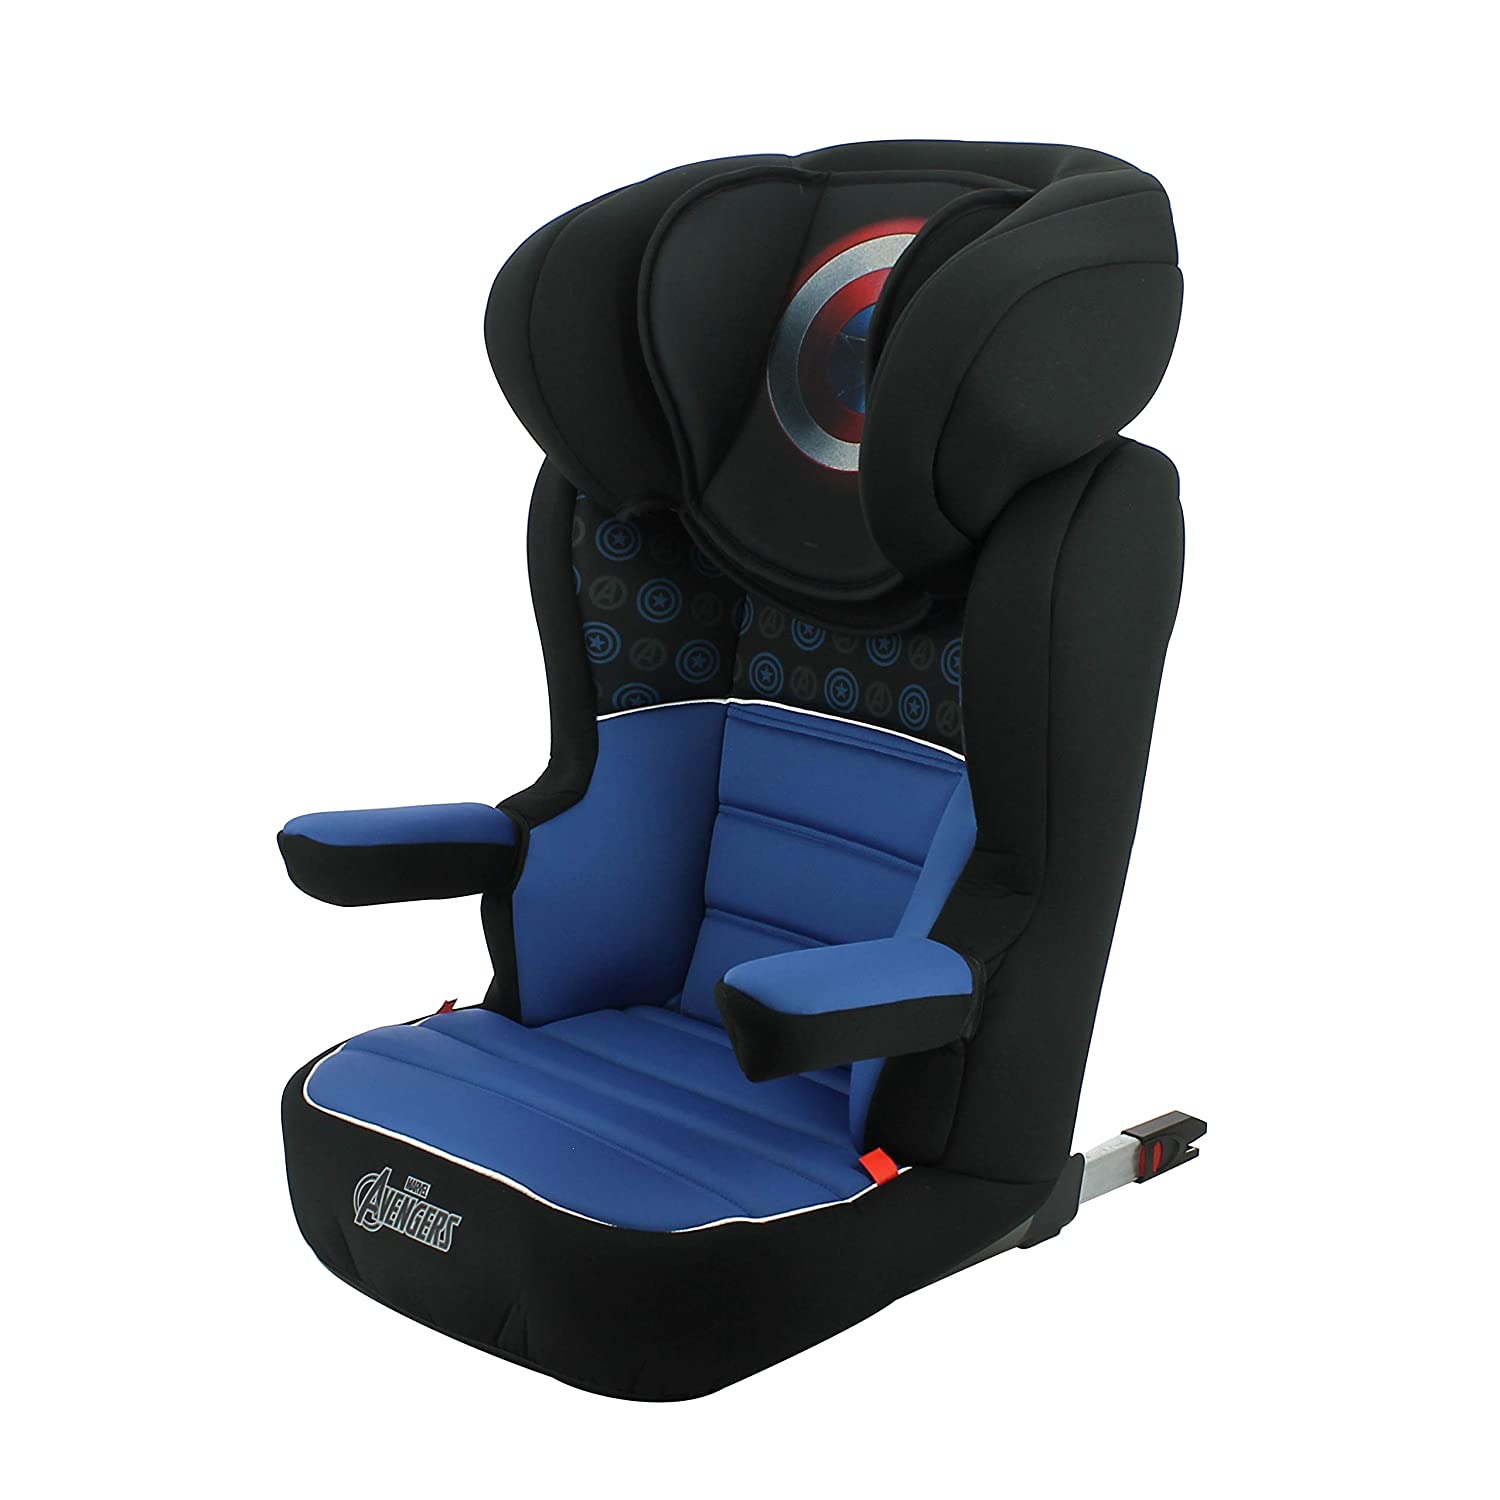 Nania Rway Easyfix Car Seat Group 2/3 - 15-36 kg Side Protection Made in France Captain America